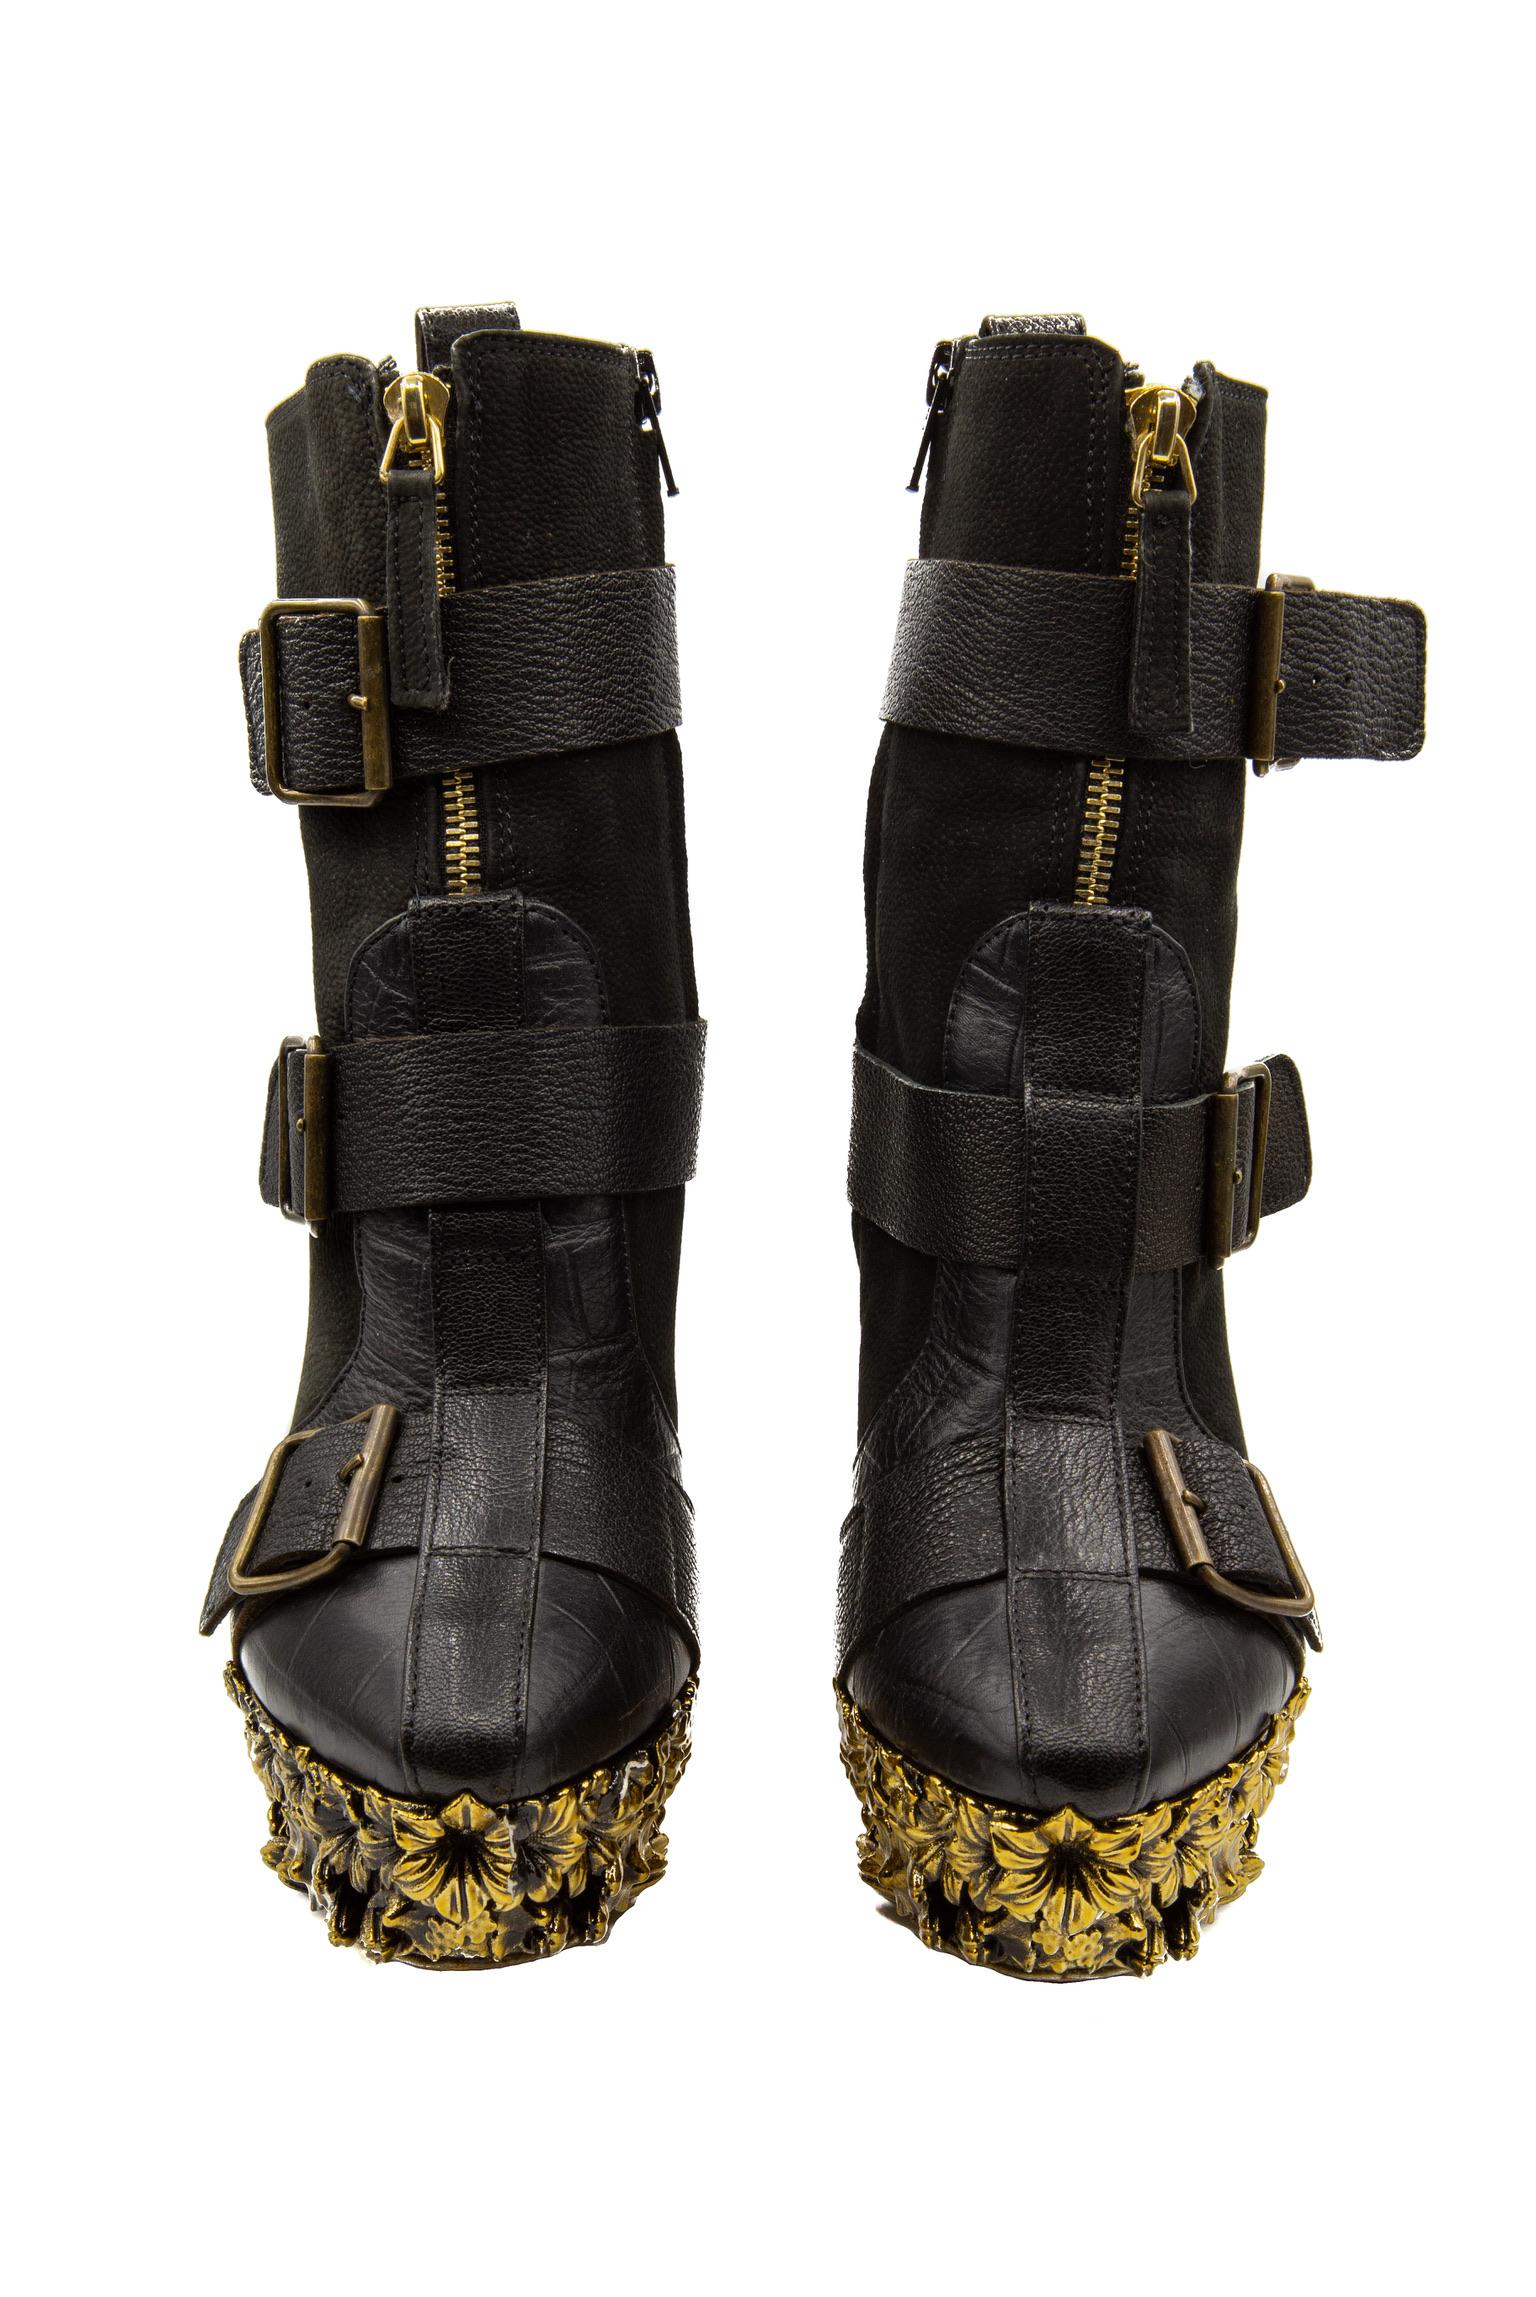 Alexander McQueen Fall 2010 Ready-To-Wear Black Leather Ankle Boots with a gold floral metal platform and three leather straps with gold buckles. These ankle boots were featured on the Angels and demons runway in look two - as modelled by Alla